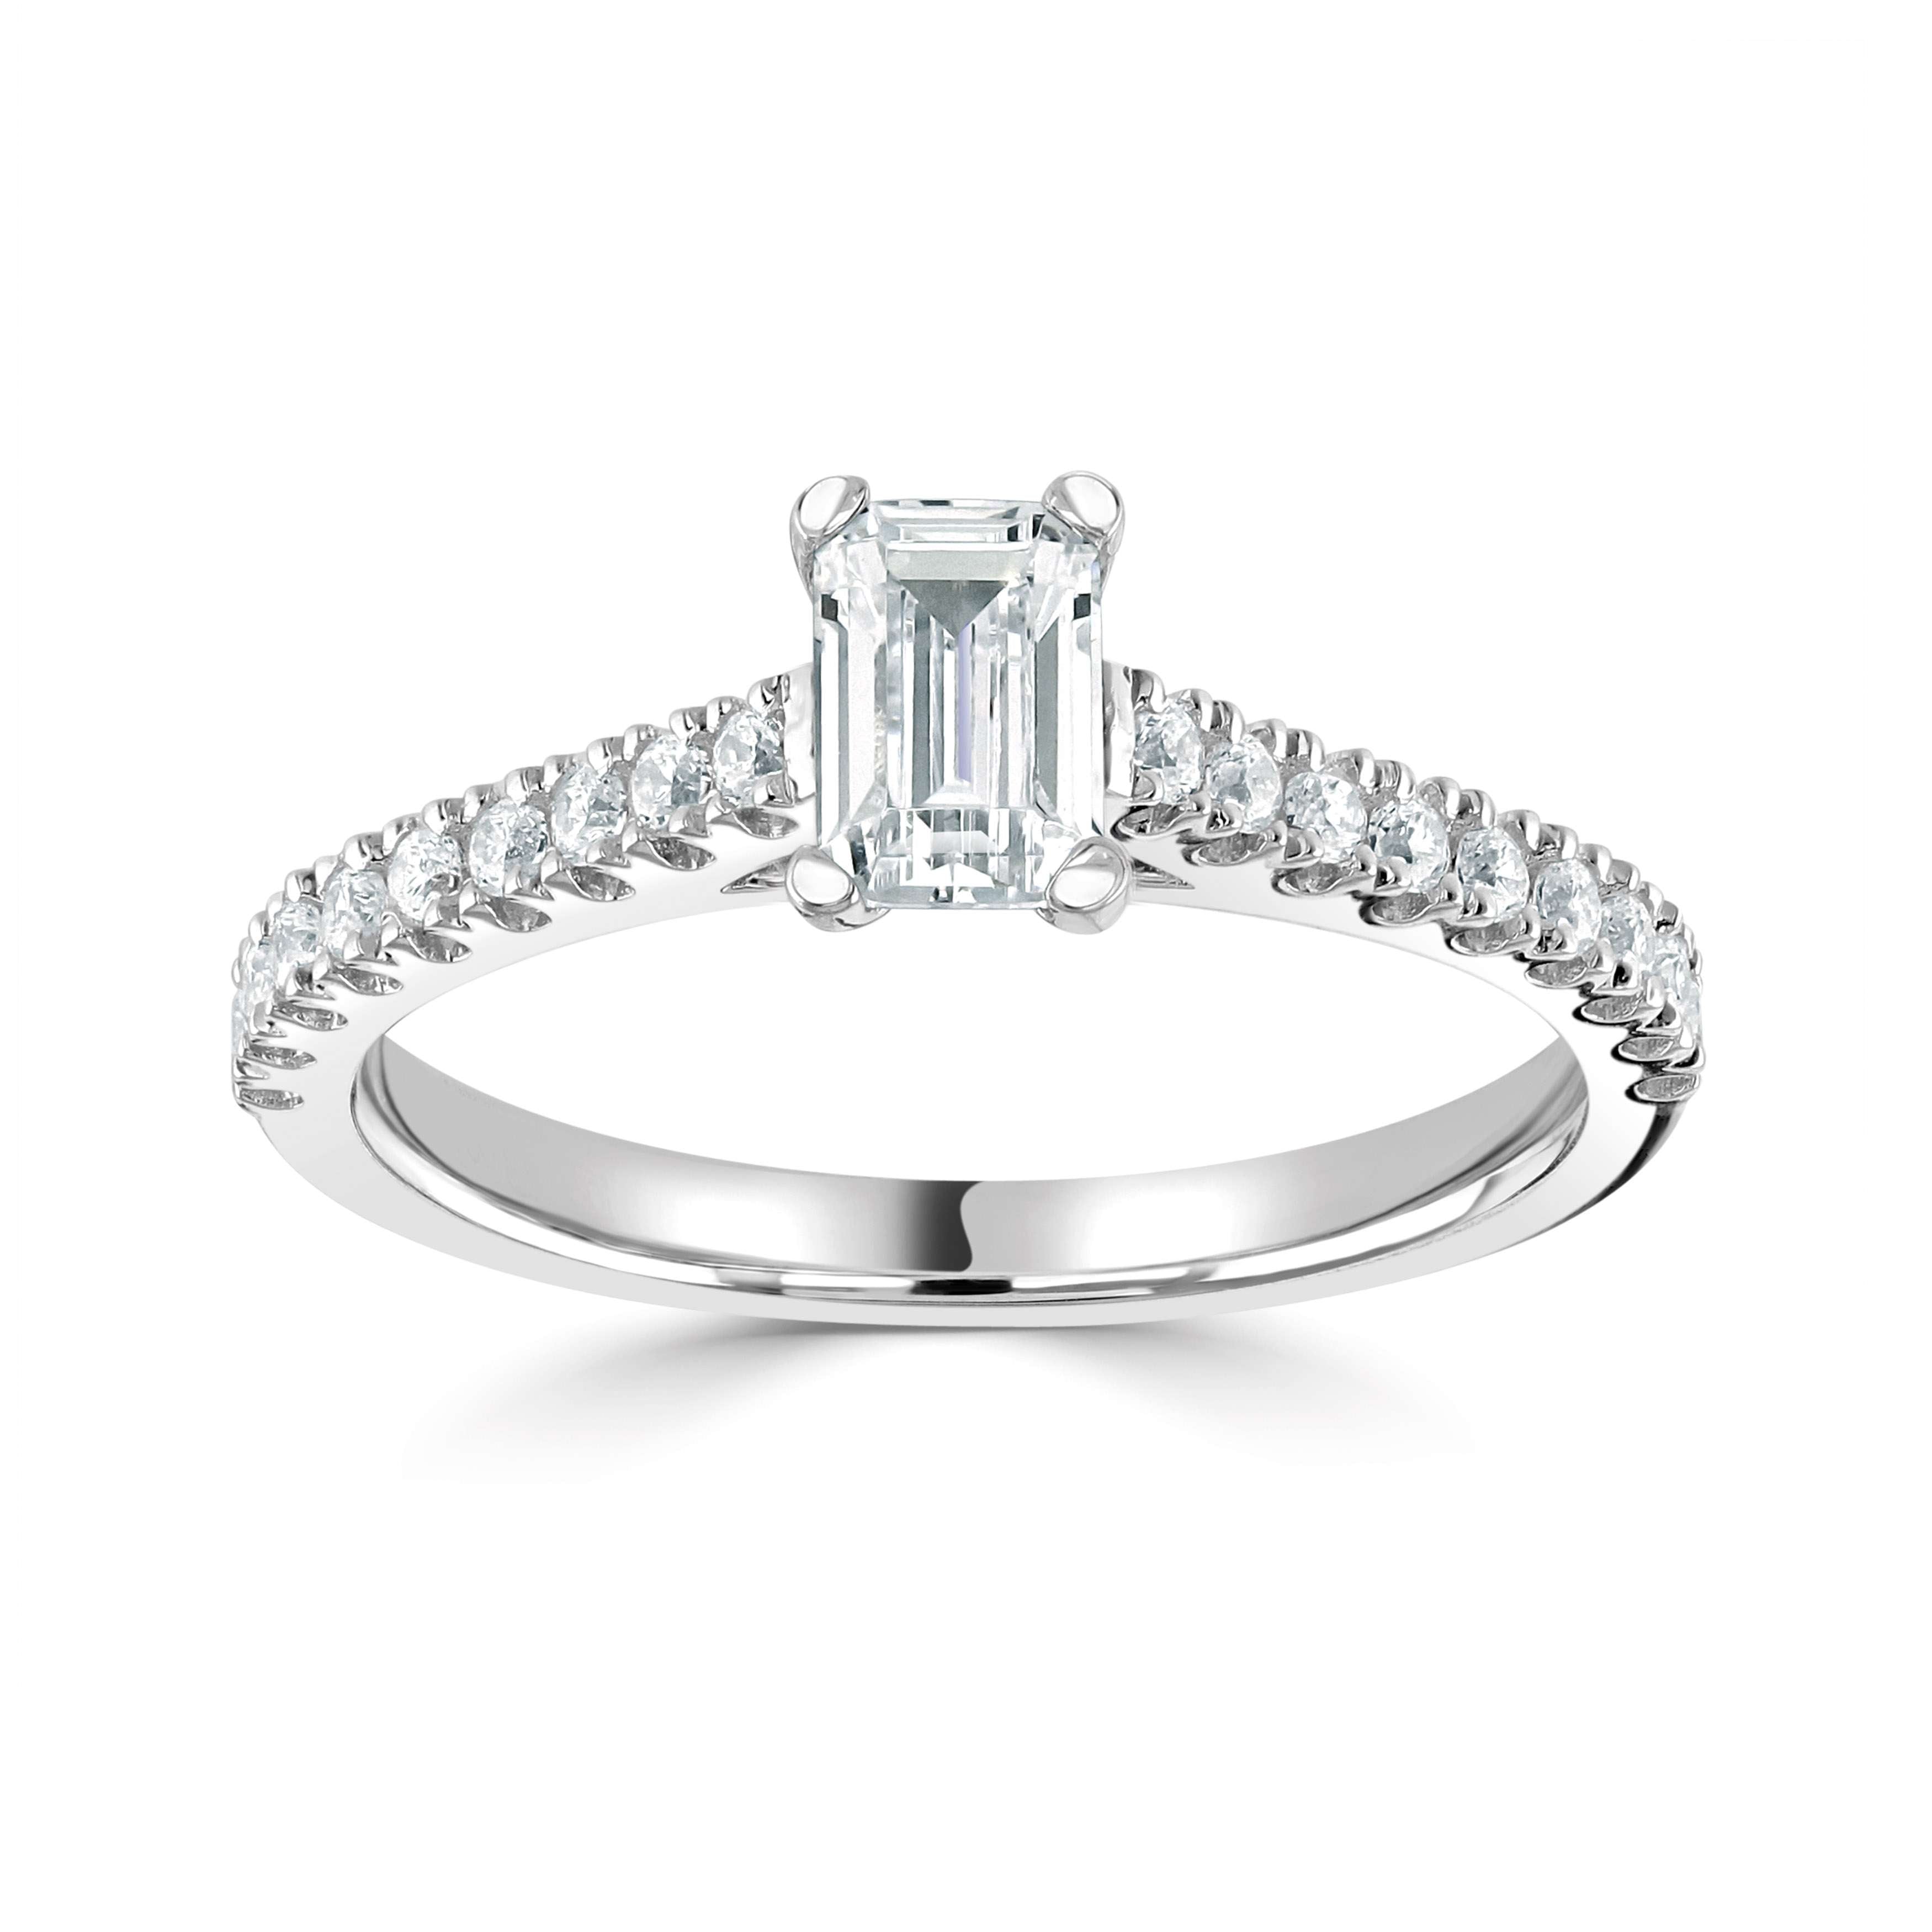 Serena *Select an Emerald Cut Diamond 0.40ct or above